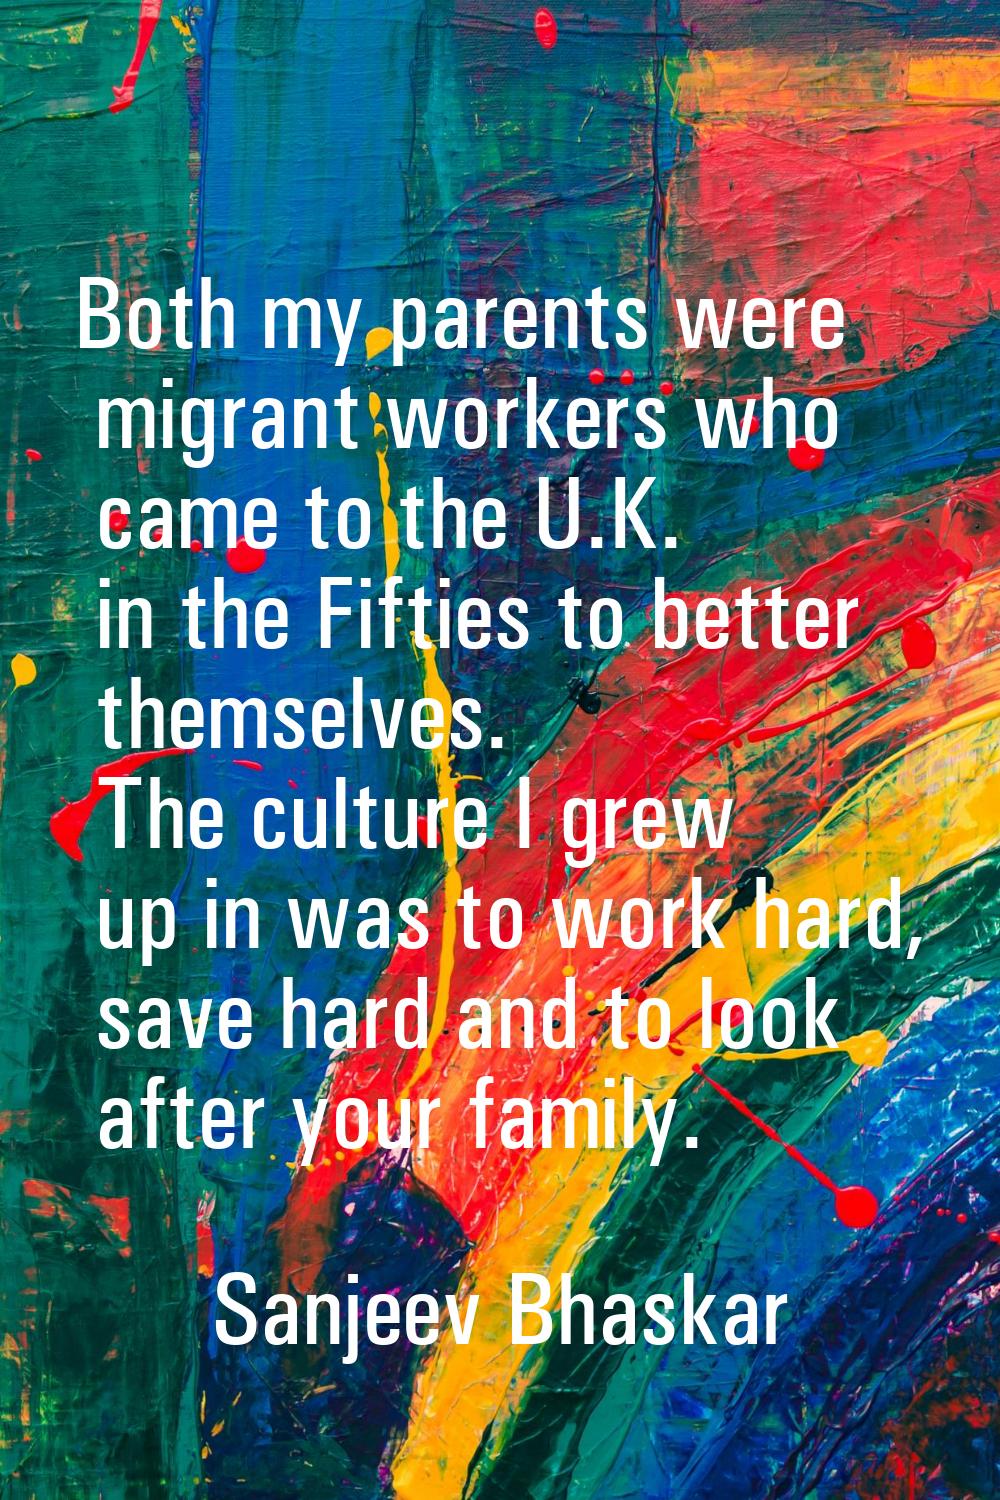 Both my parents were migrant workers who came to the U.K. in the Fifties to better themselves. The 